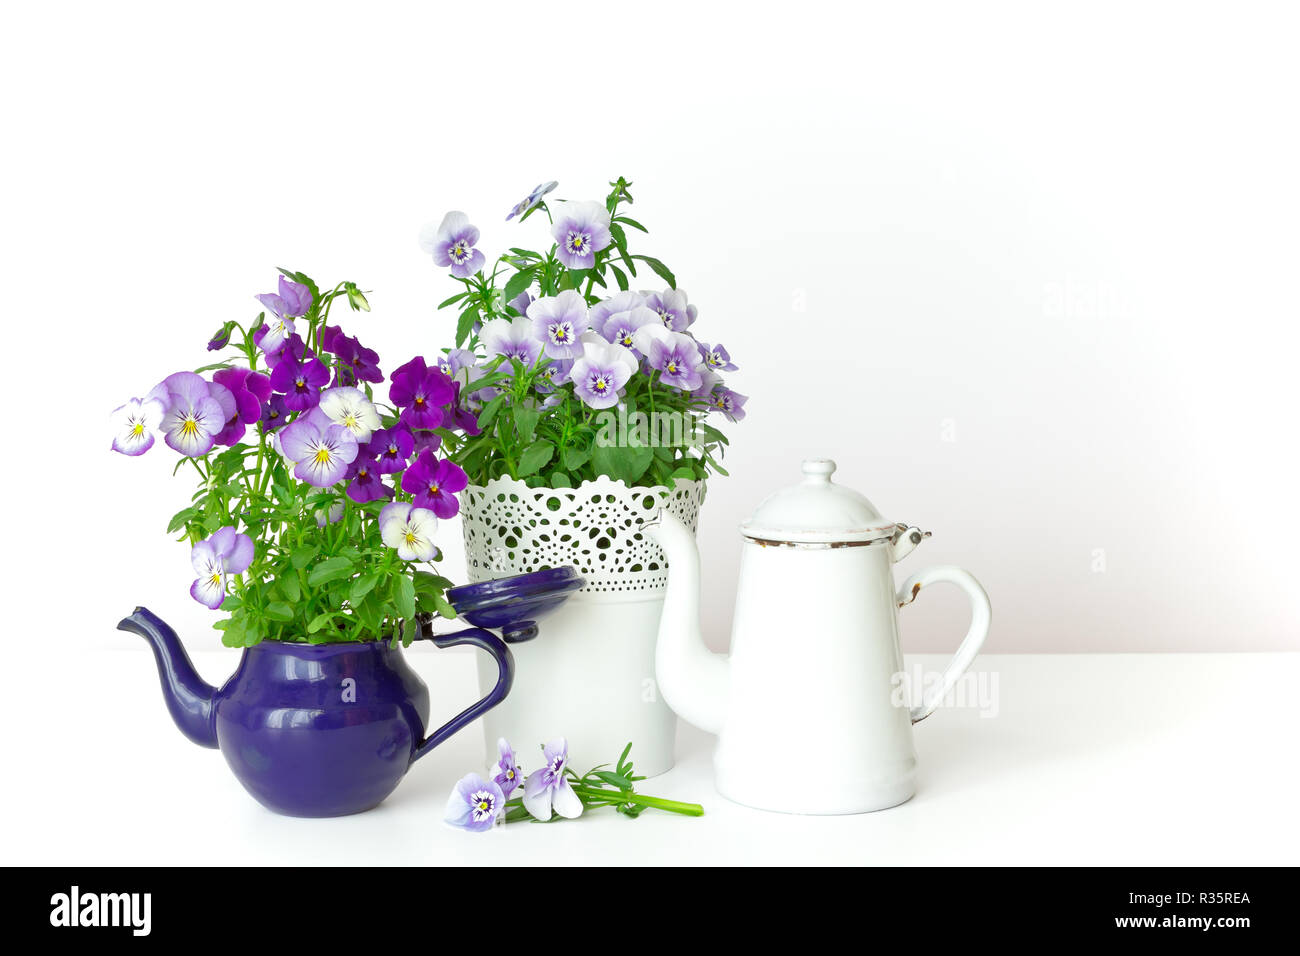 Purple, blue and lilac pansy flowers in a beautiful pot with two vintage enamel jugs or pots on white background, copy or text space Stock Photo